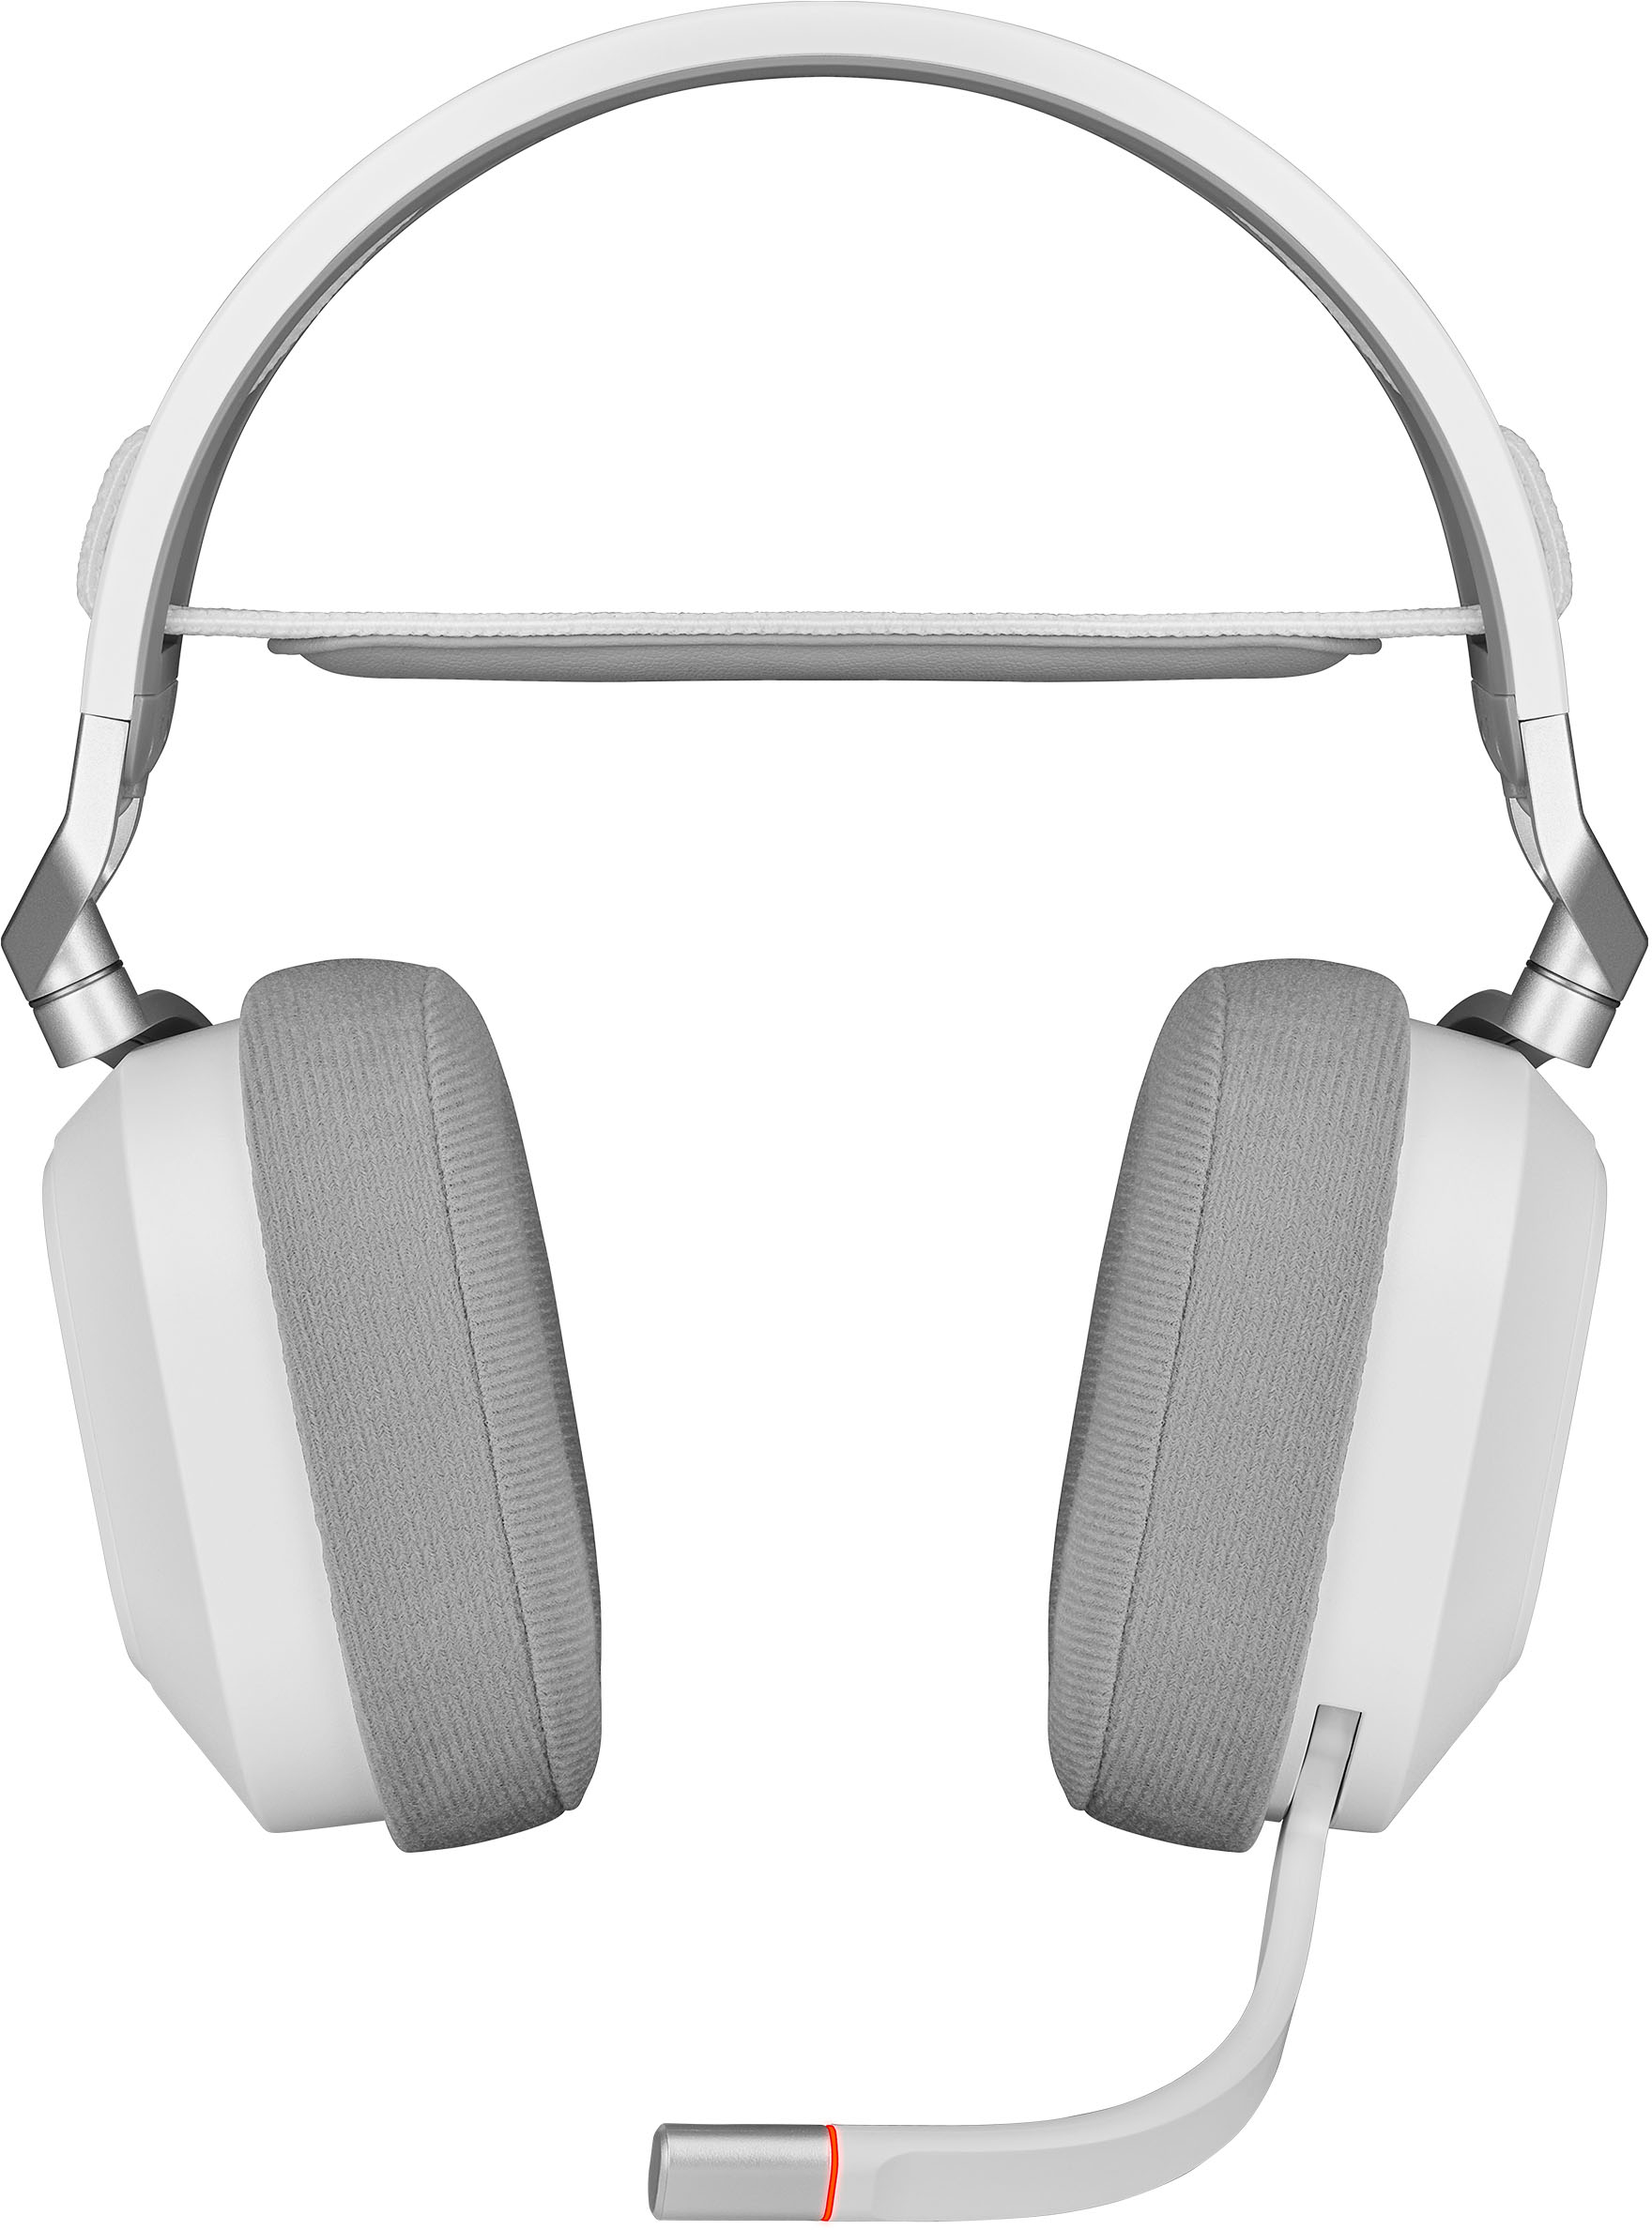 HS80 Headset for CORSAIR CA-9011236-NA Wireless White PC, - Gaming Mac, PS4 RGB Buy PS5, Best